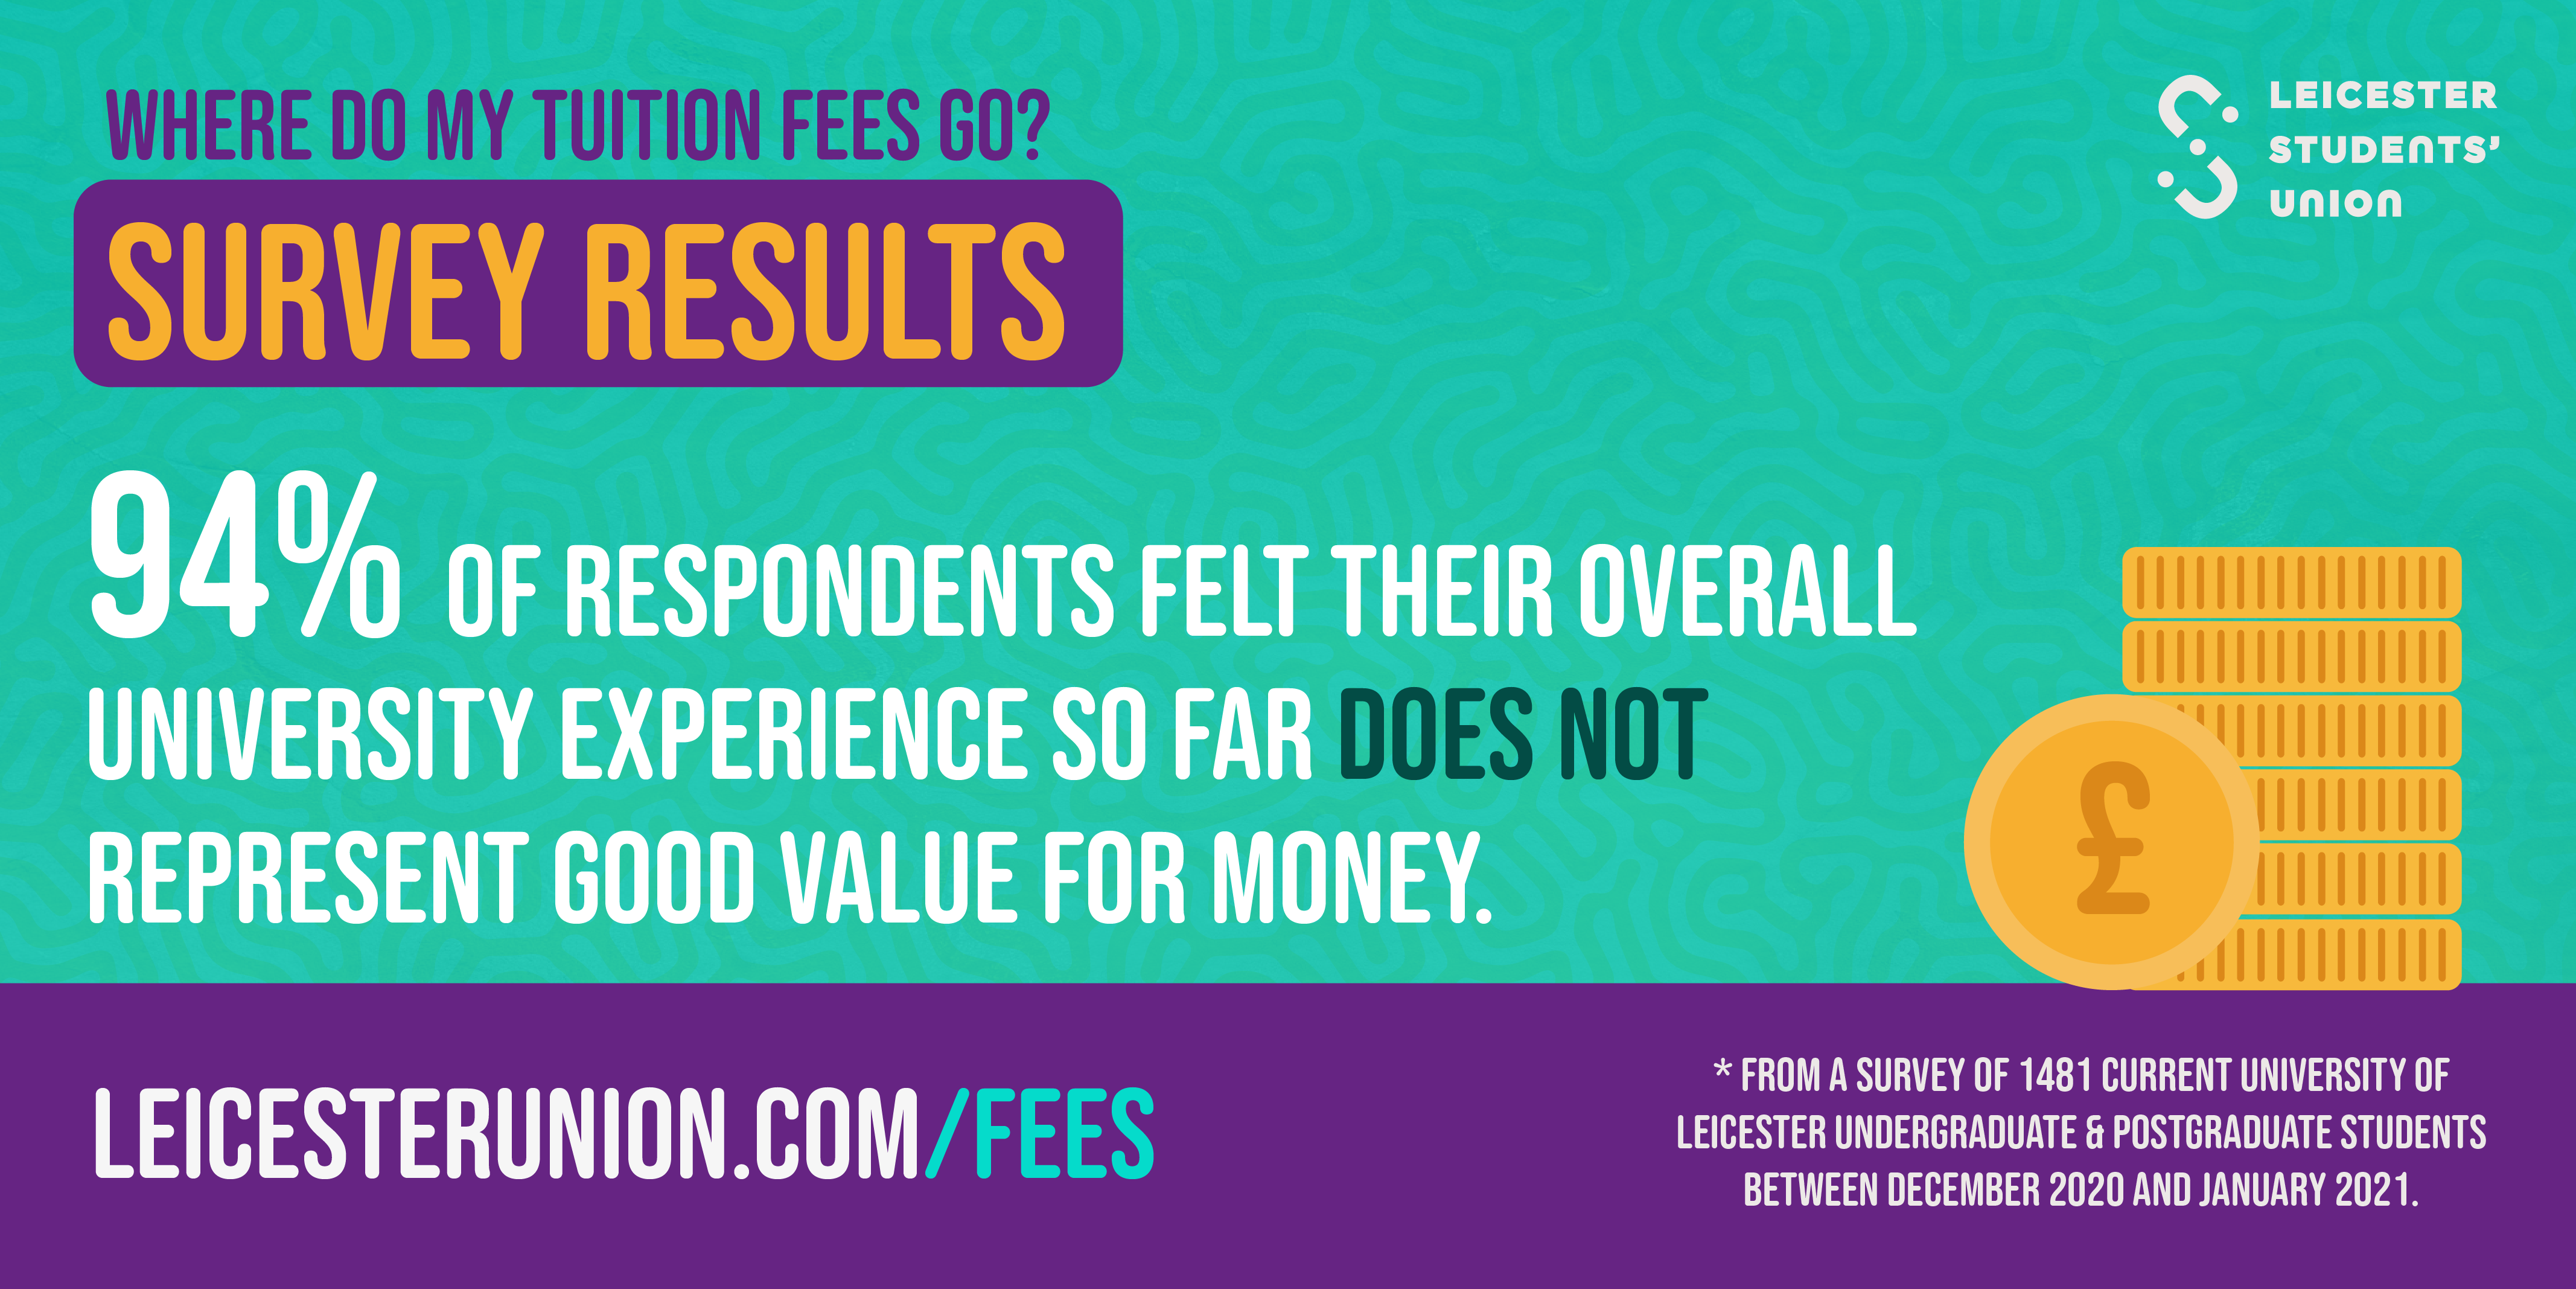 94% of respondents felt their overall University experience so far does not represent good value for money.